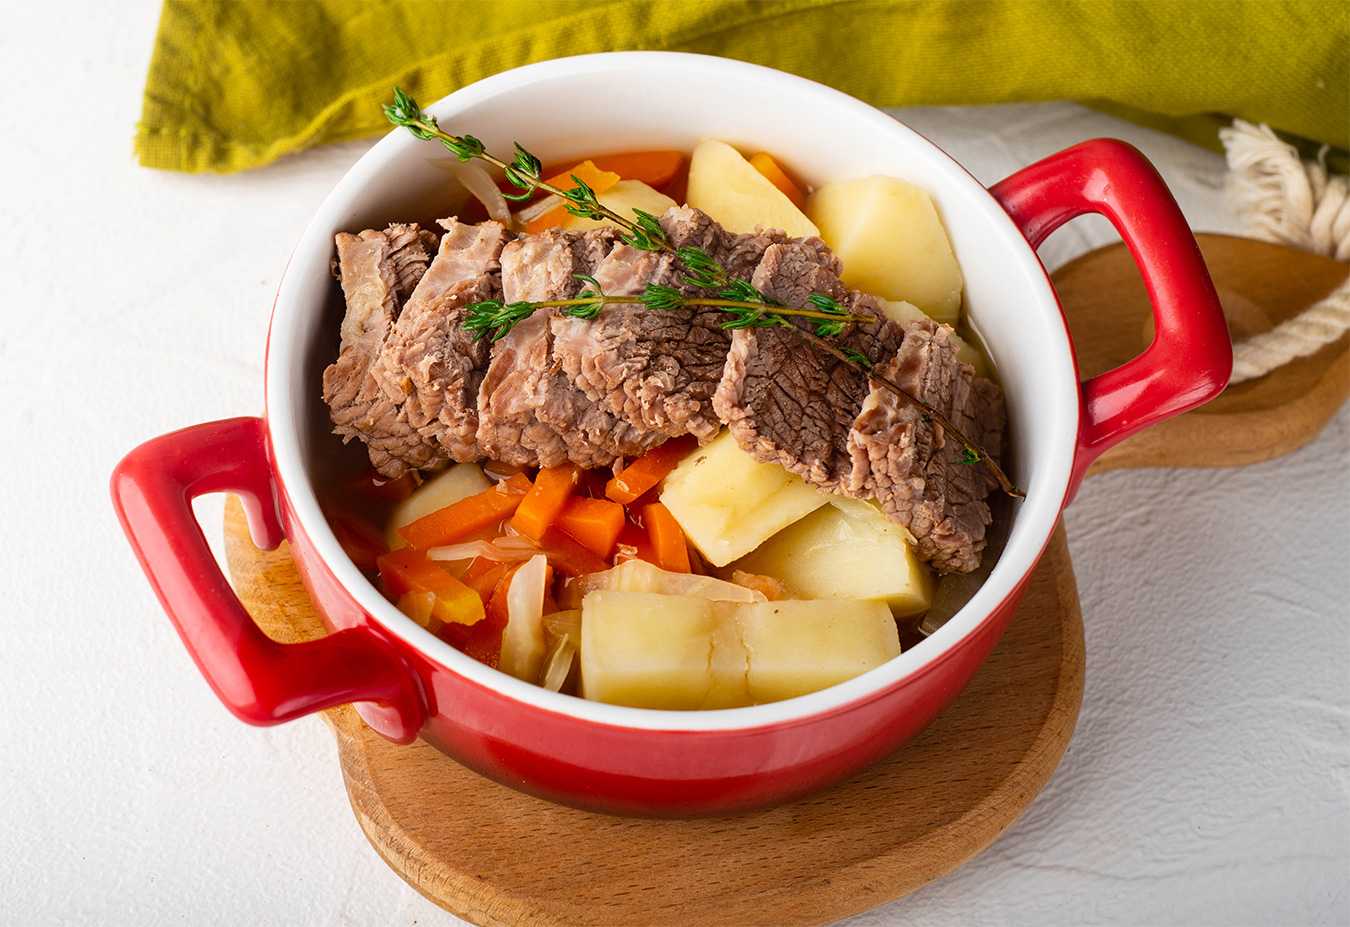 Corned beef slices over potato and carrot cubes topped with thyme in red bowl